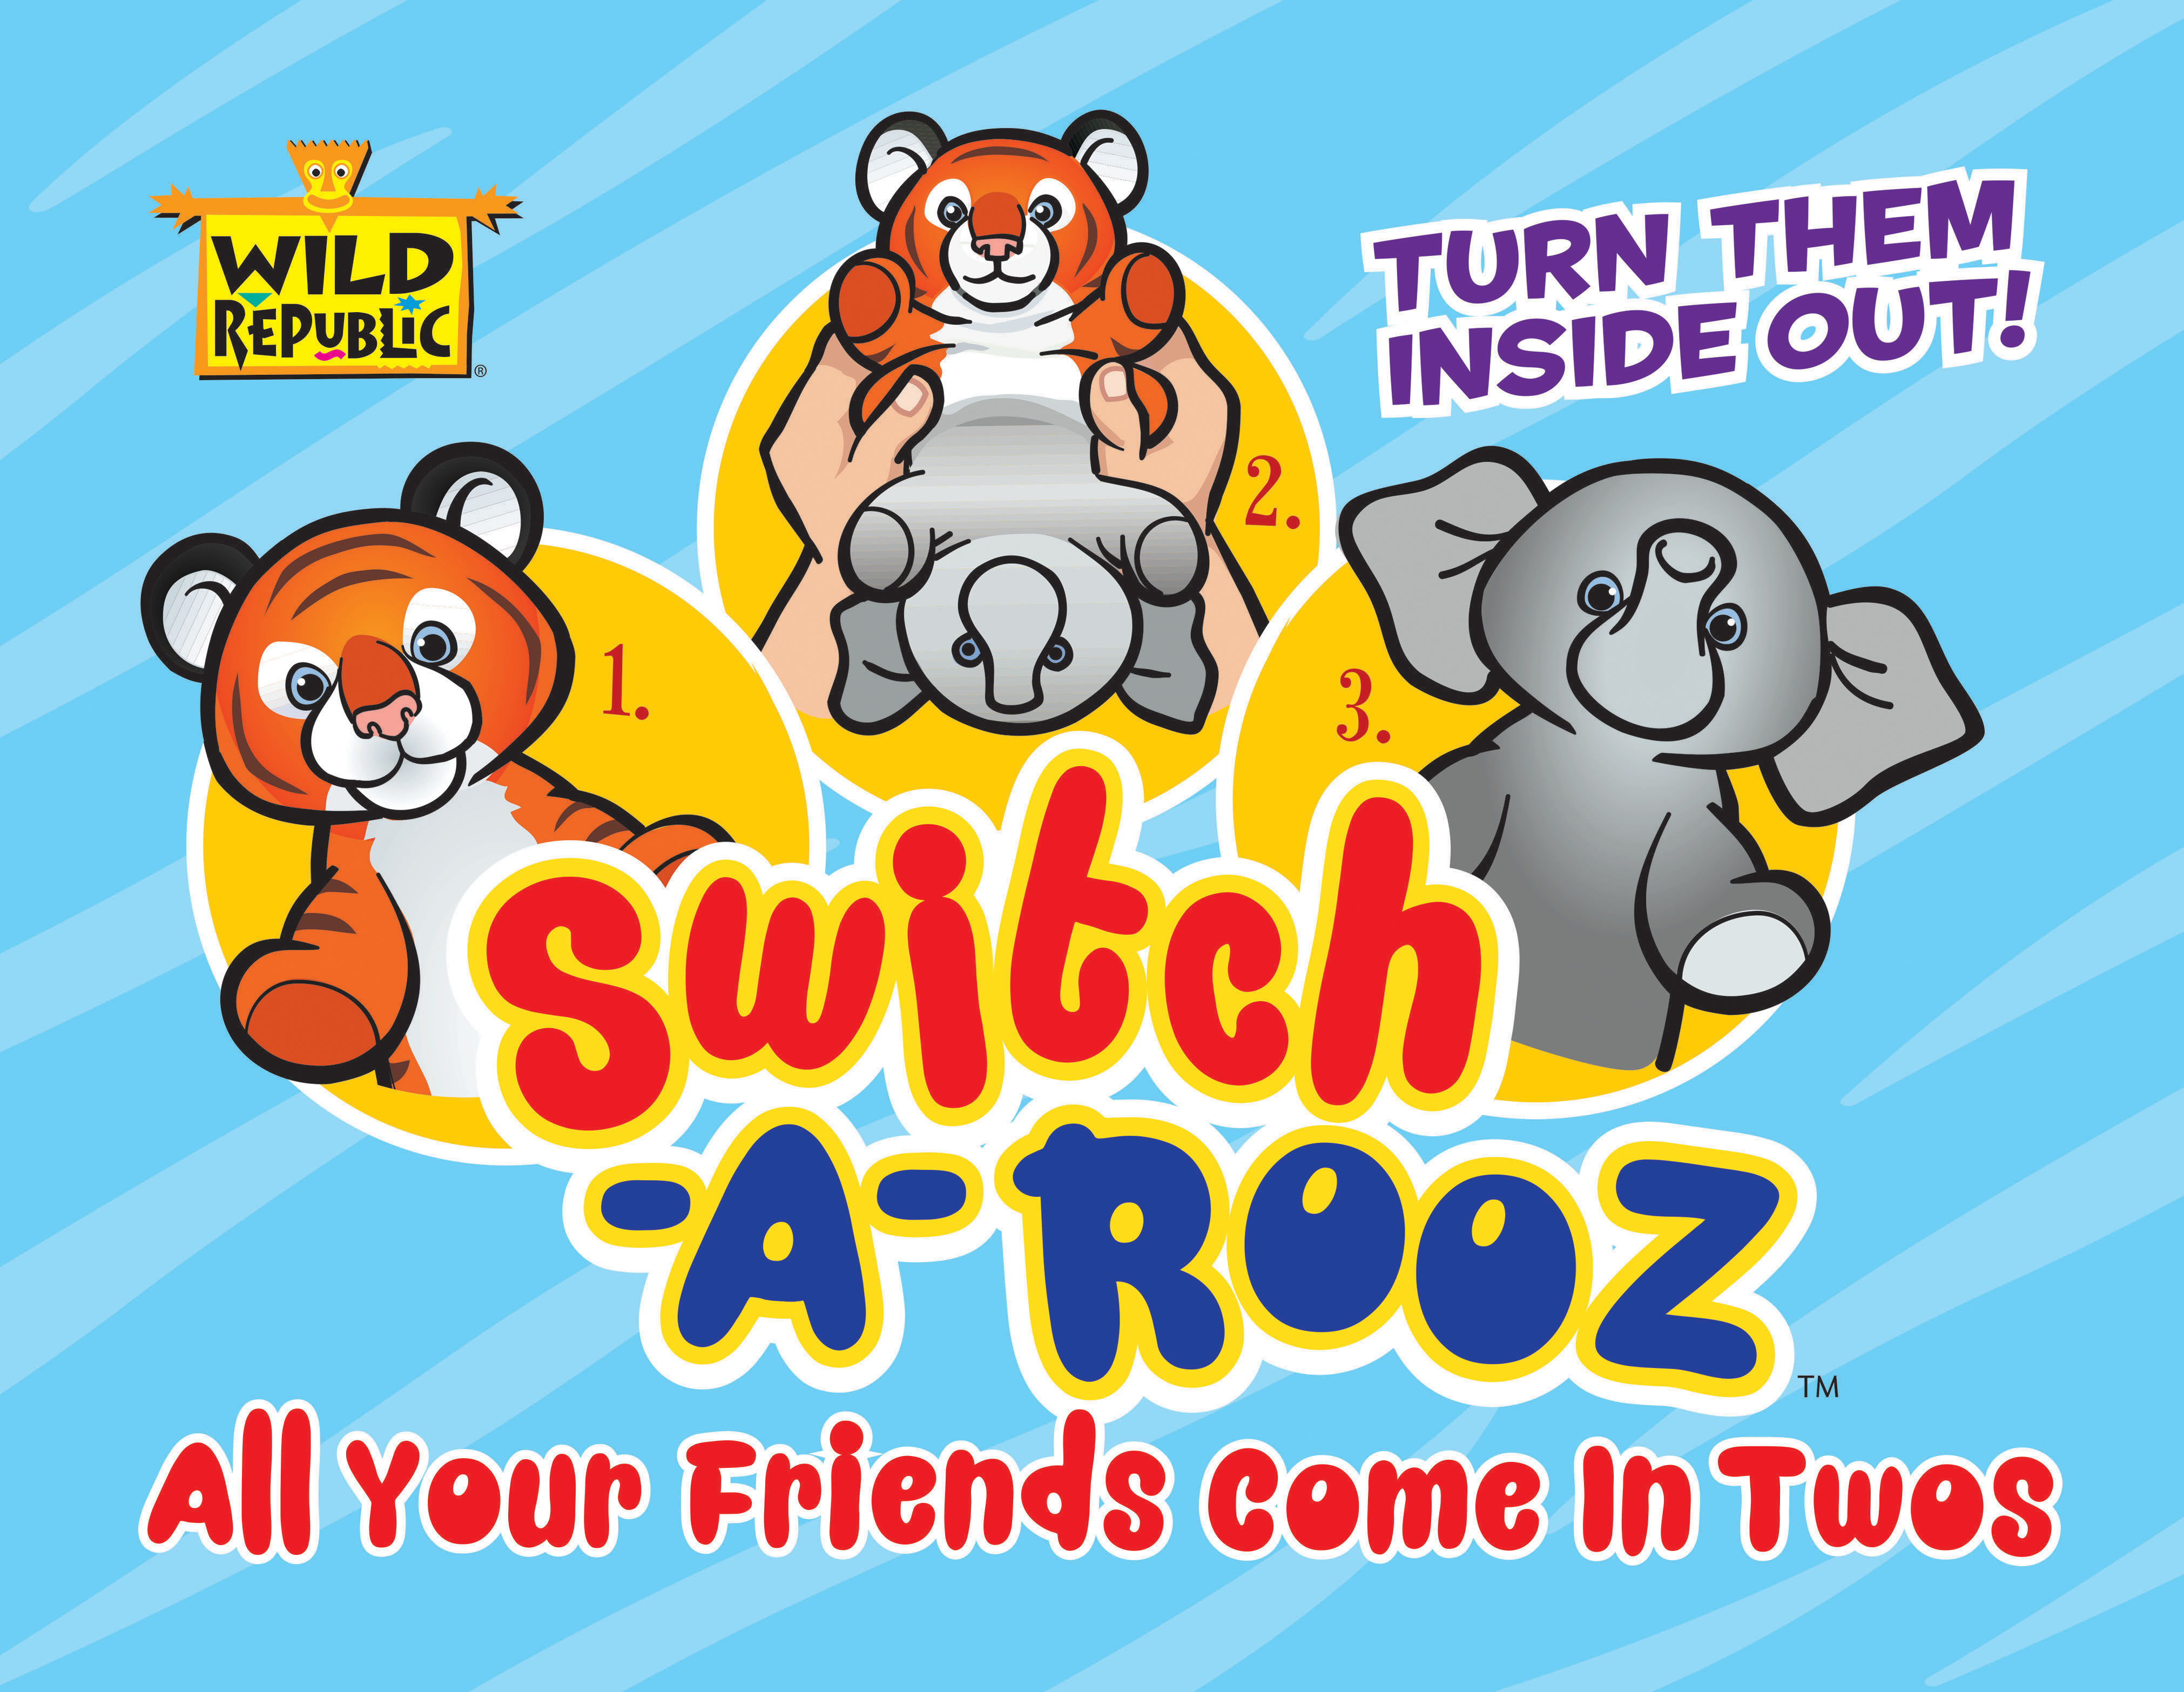 Switch-A-Rooz